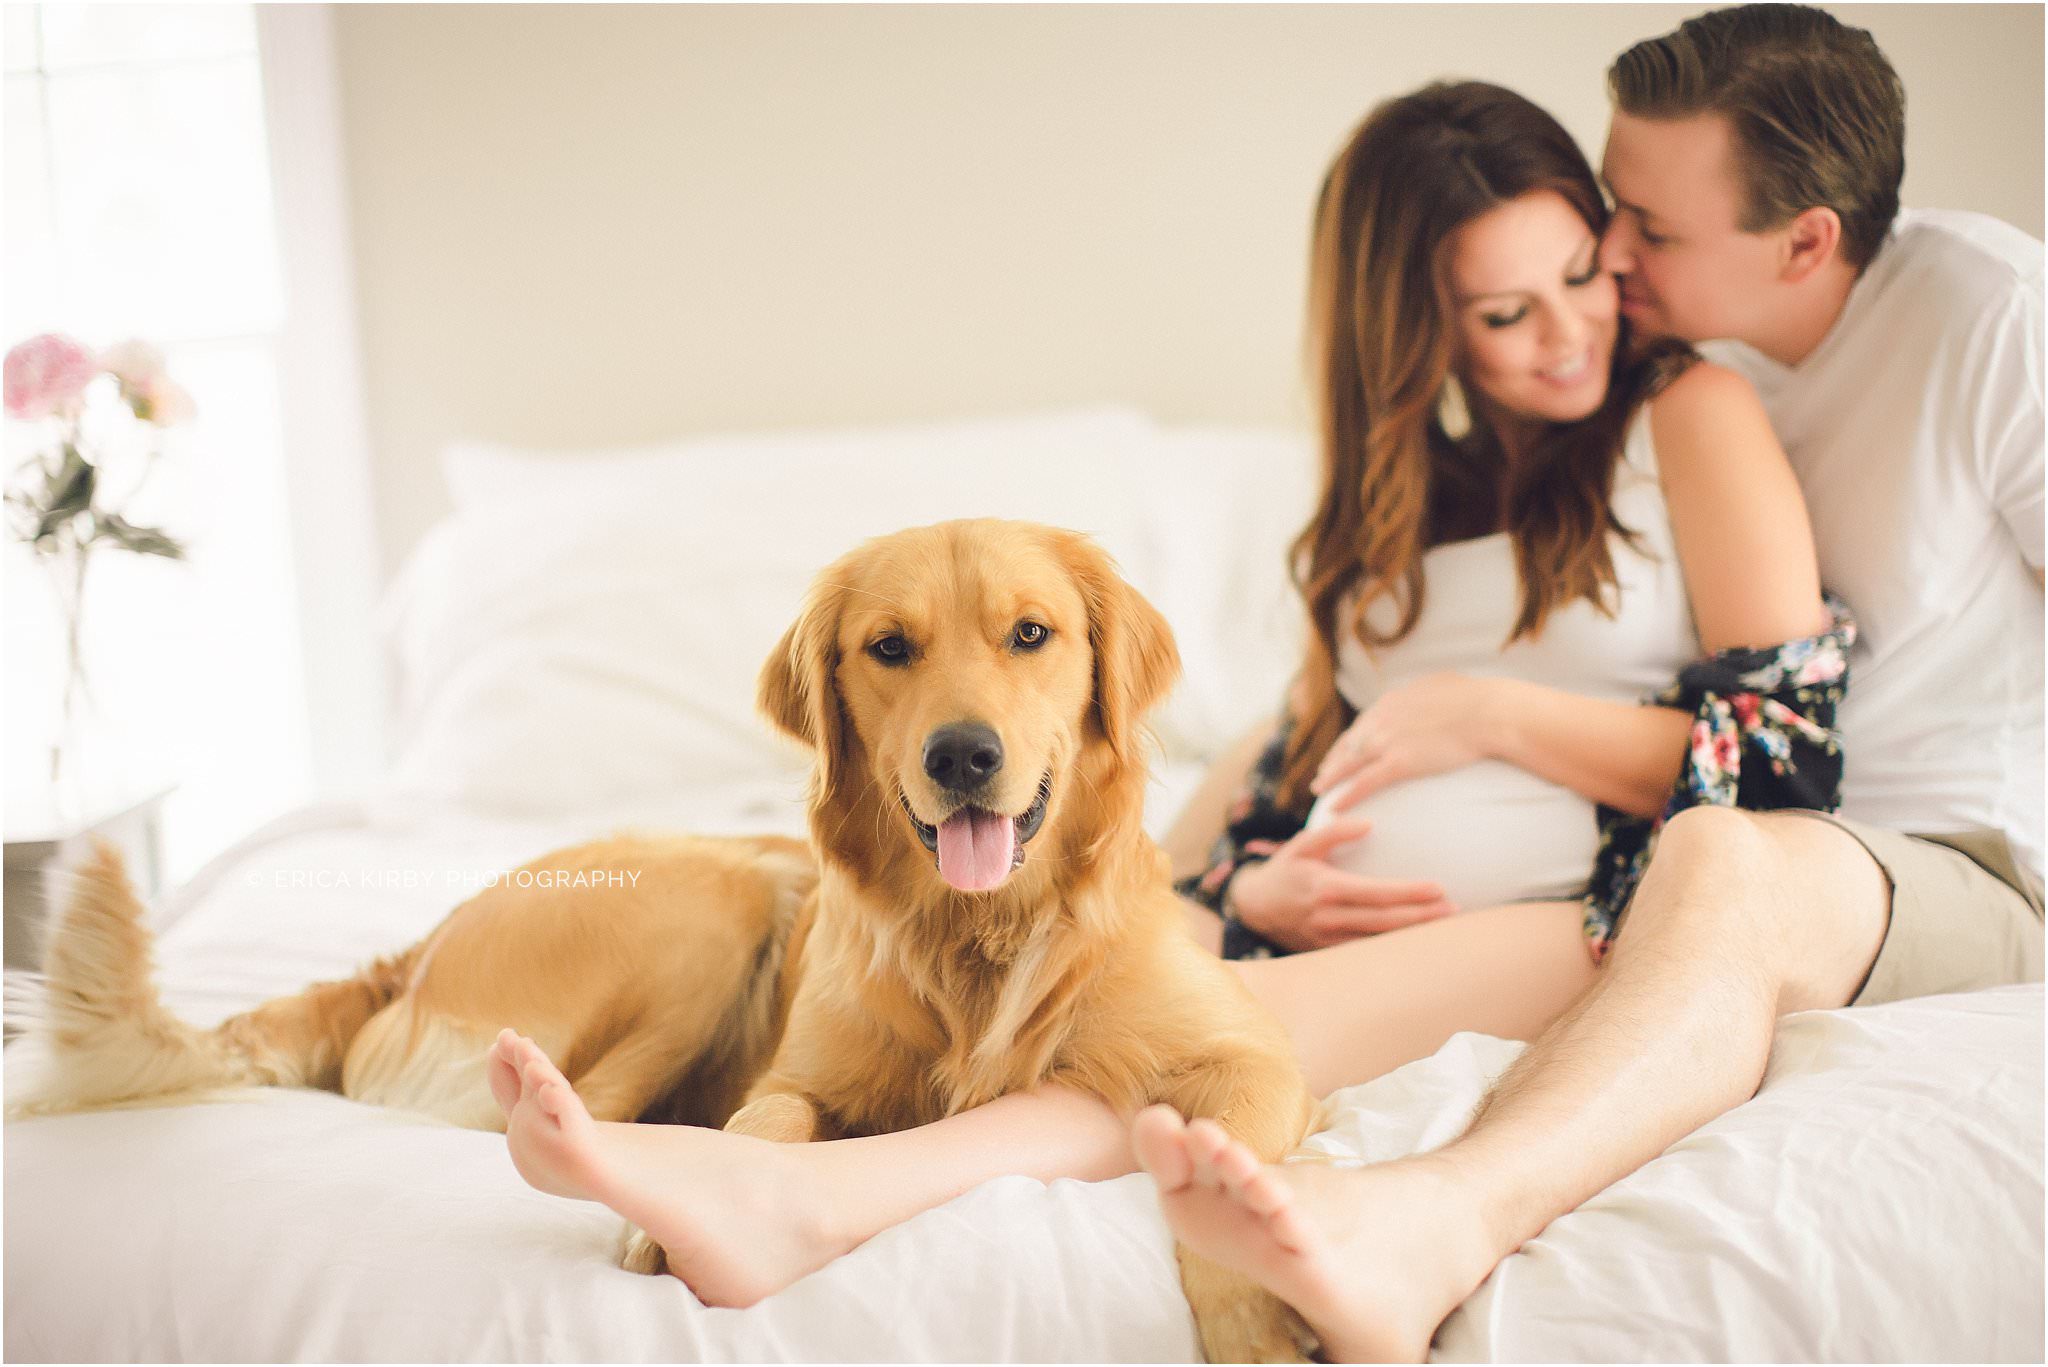 Maternity Photography Northwest AR - in home lifestyle maternity session in northwest arkansas with dog fayetteville rogers bentonville ar - erica kirby photography